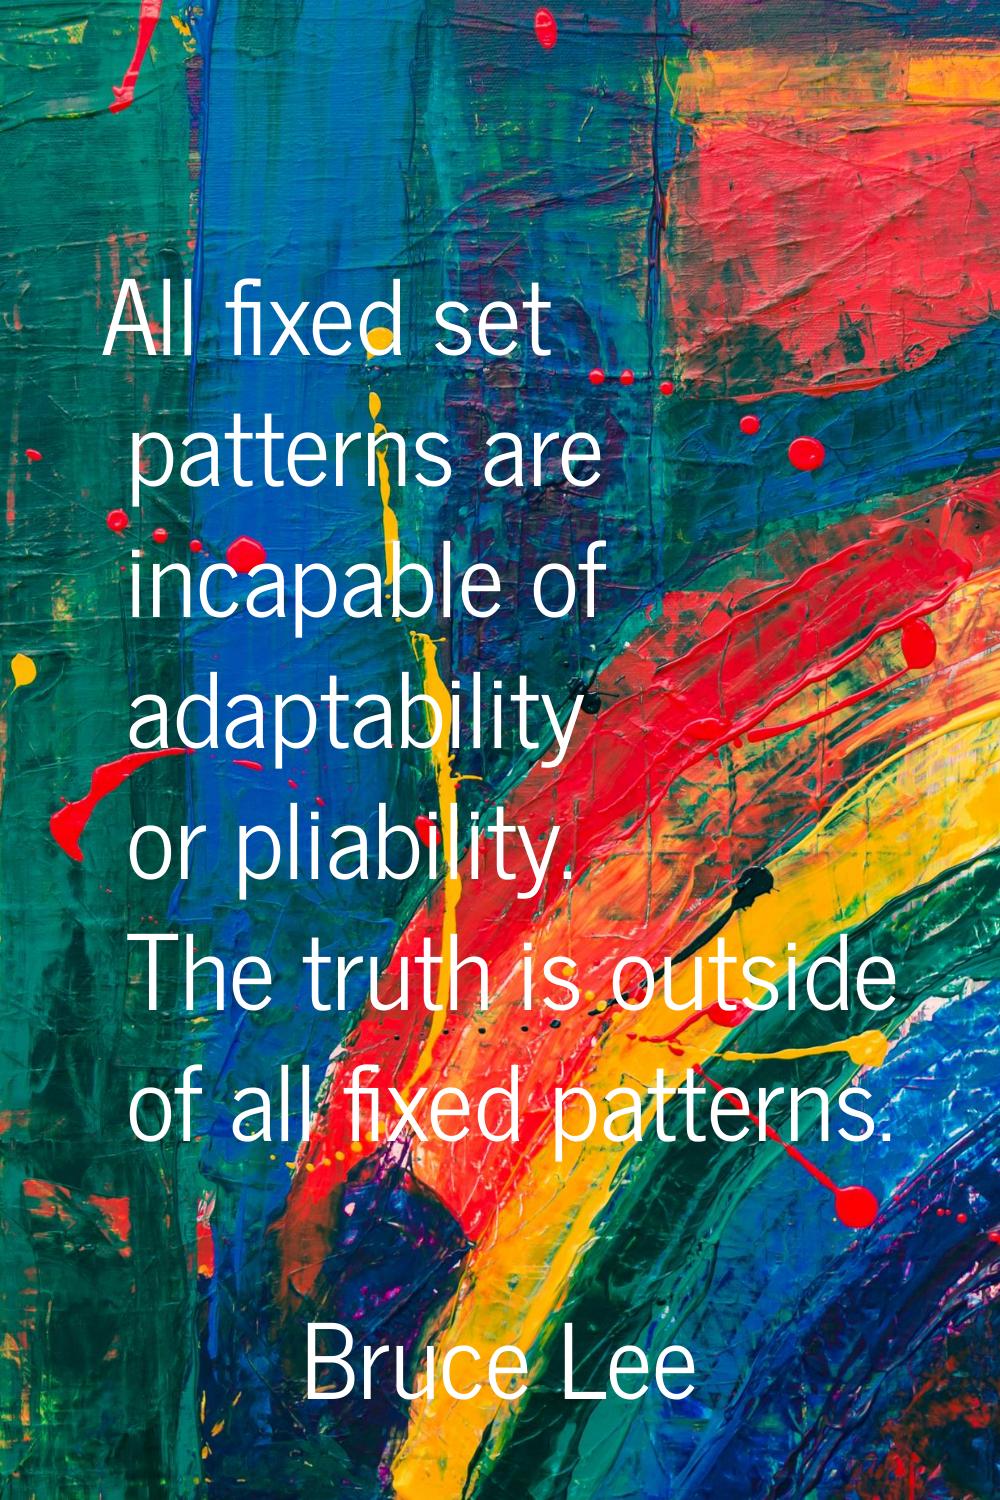 All fixed set patterns are incapable of adaptability or pliability. The truth is outside of all fix